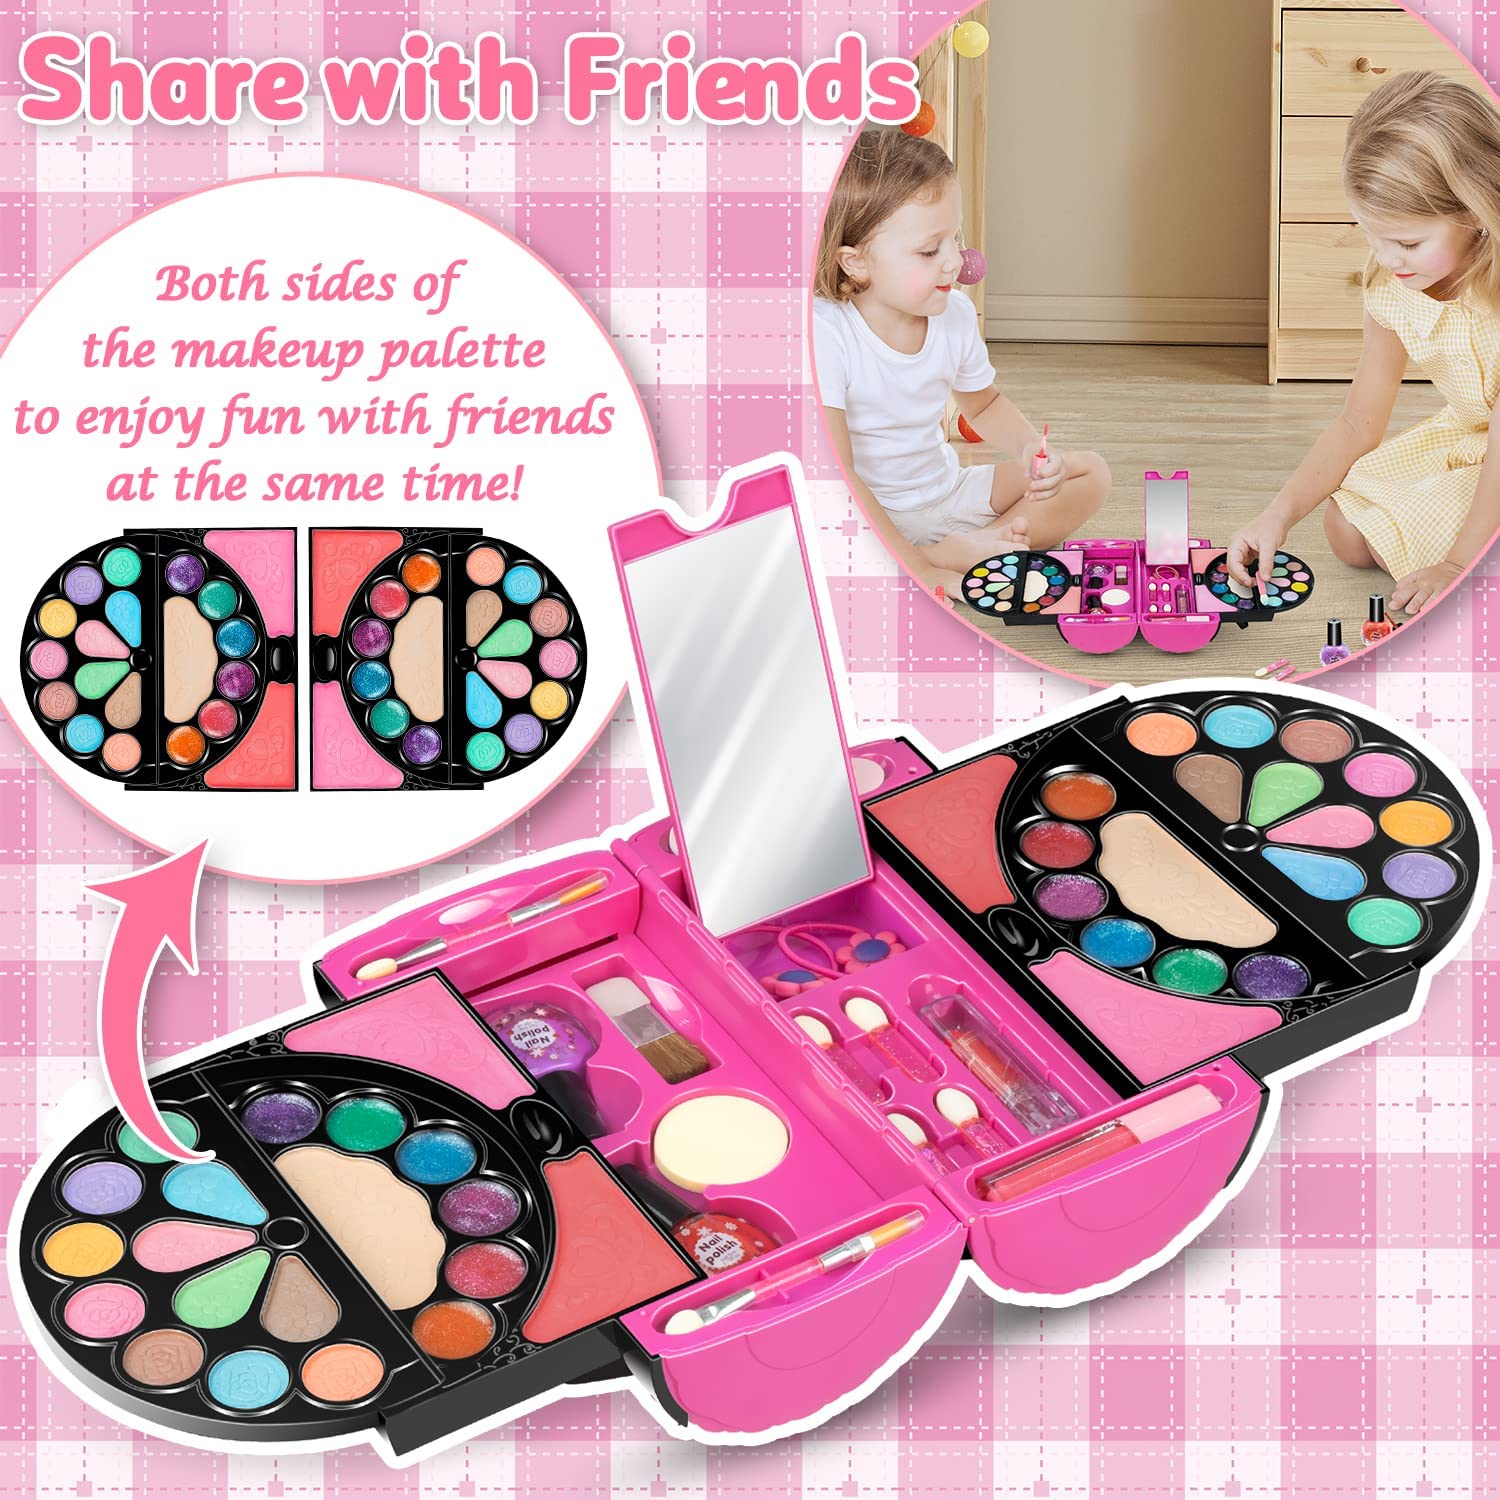 Kids makeup kit - Can my child use my makeup, or do I need to buy